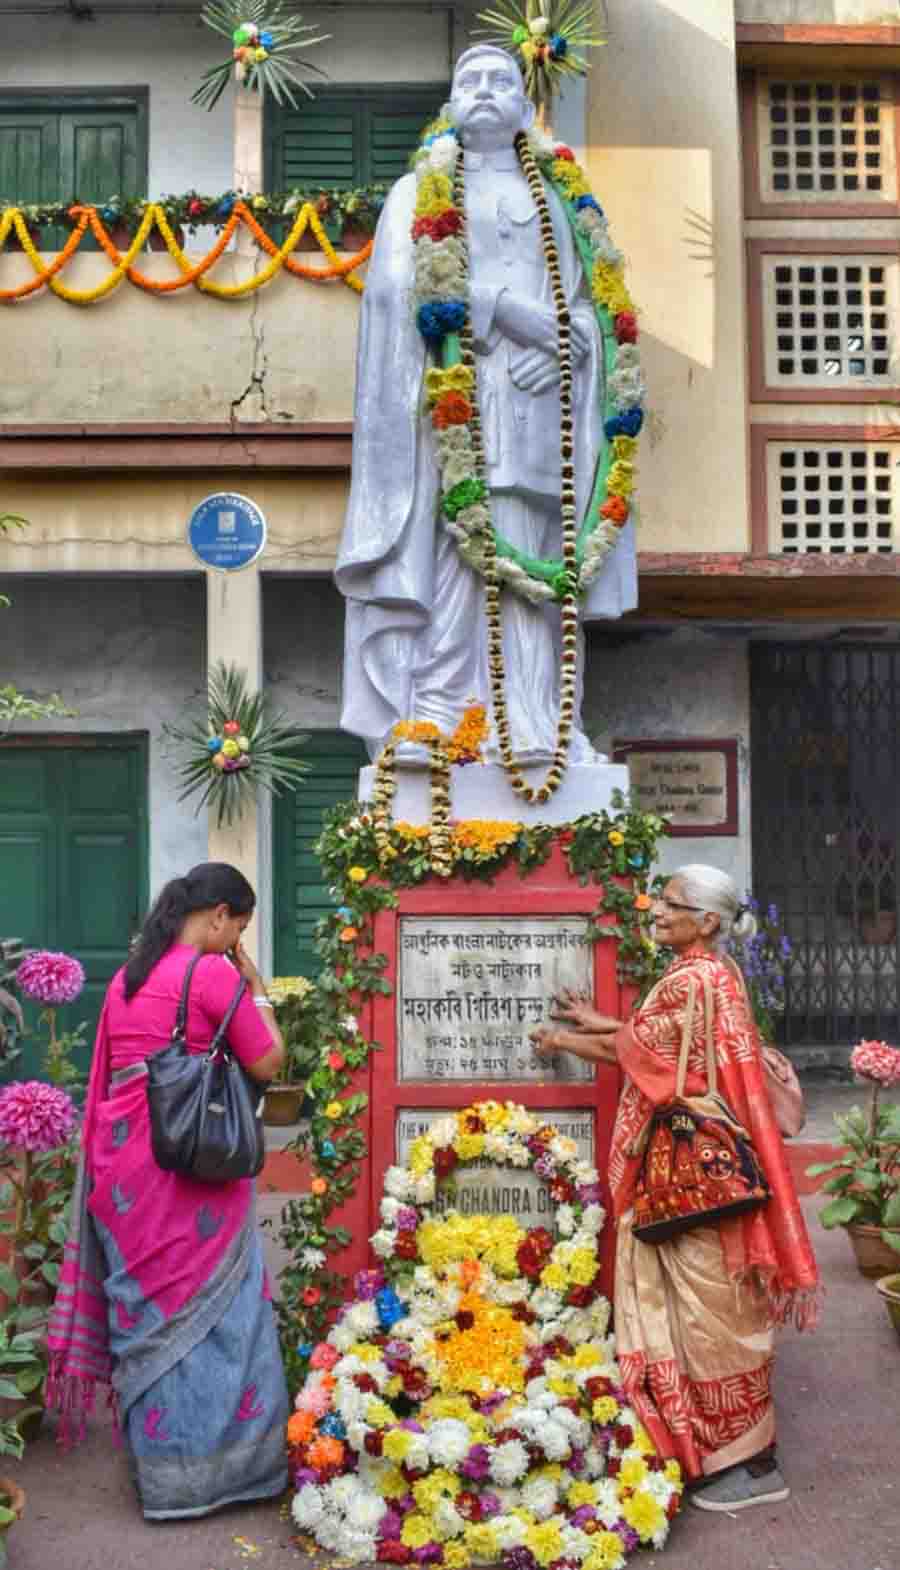 On the 181st birth anniversary of Girish Chandra Ghosh, his statue at his Bagbazar house was garlanded. Many visitors also paid floral tributes on Wednesday  